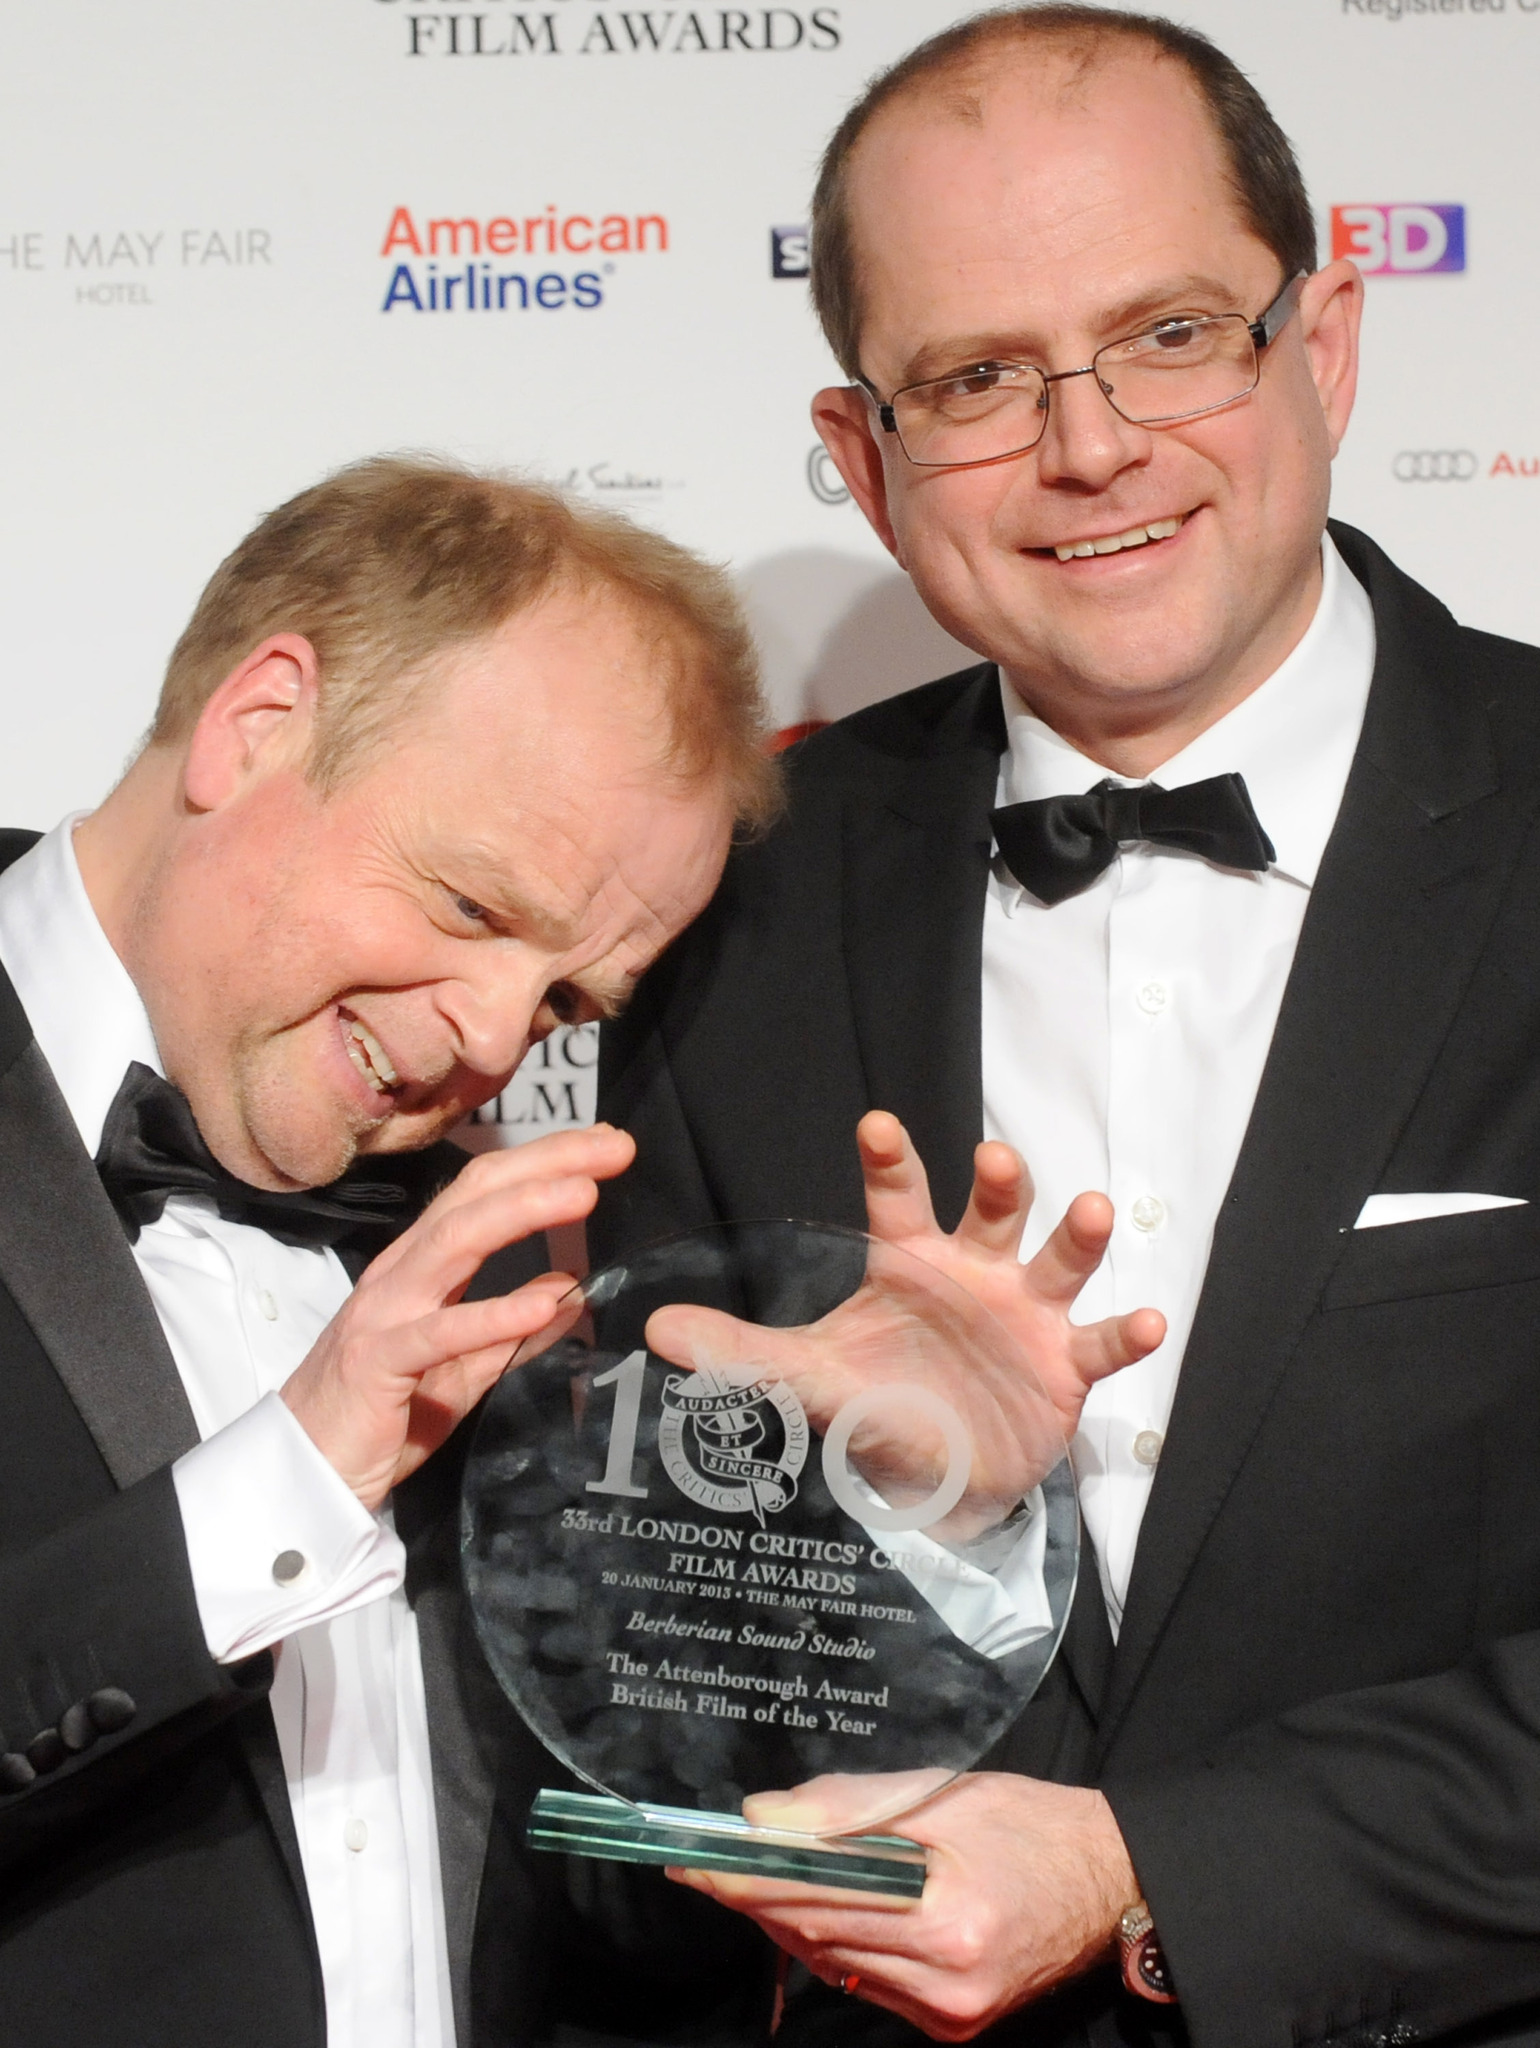 Toby Jones and Stevie Heywood pose in The London Film Critics Film Awards press room on January 20, 2013 in London, England.